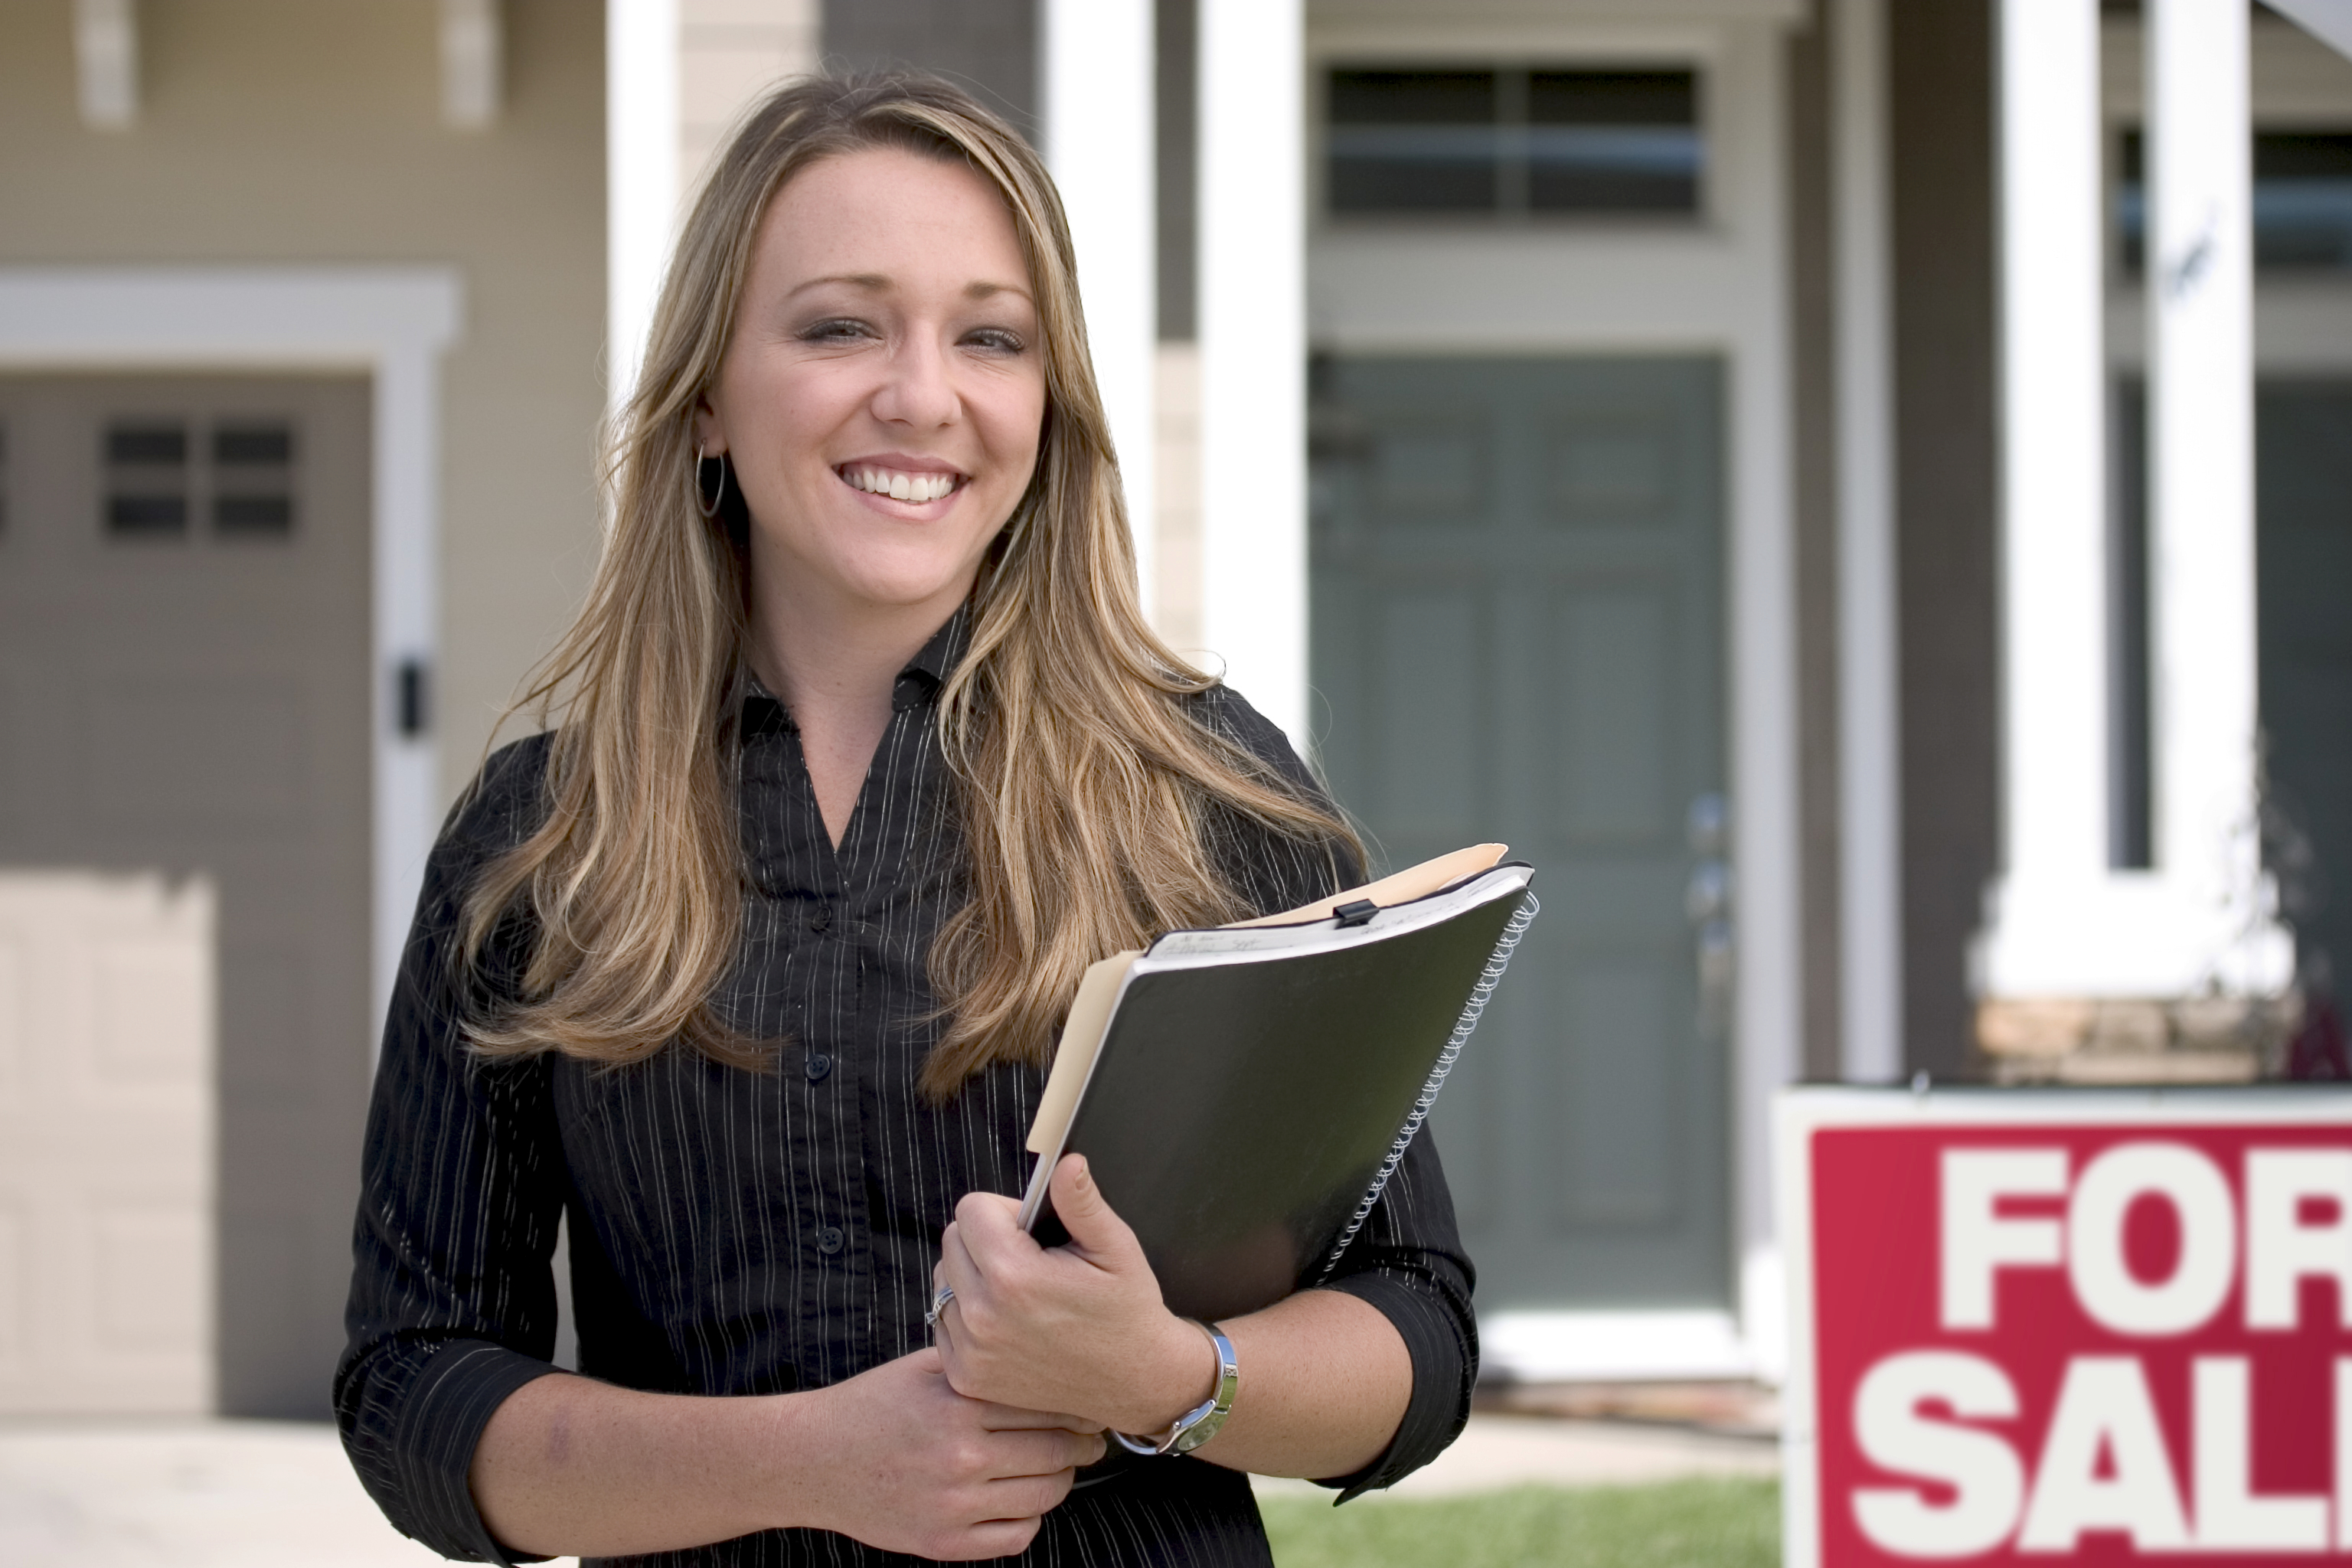 Difference Between A Real Estate Agent And A Realtor